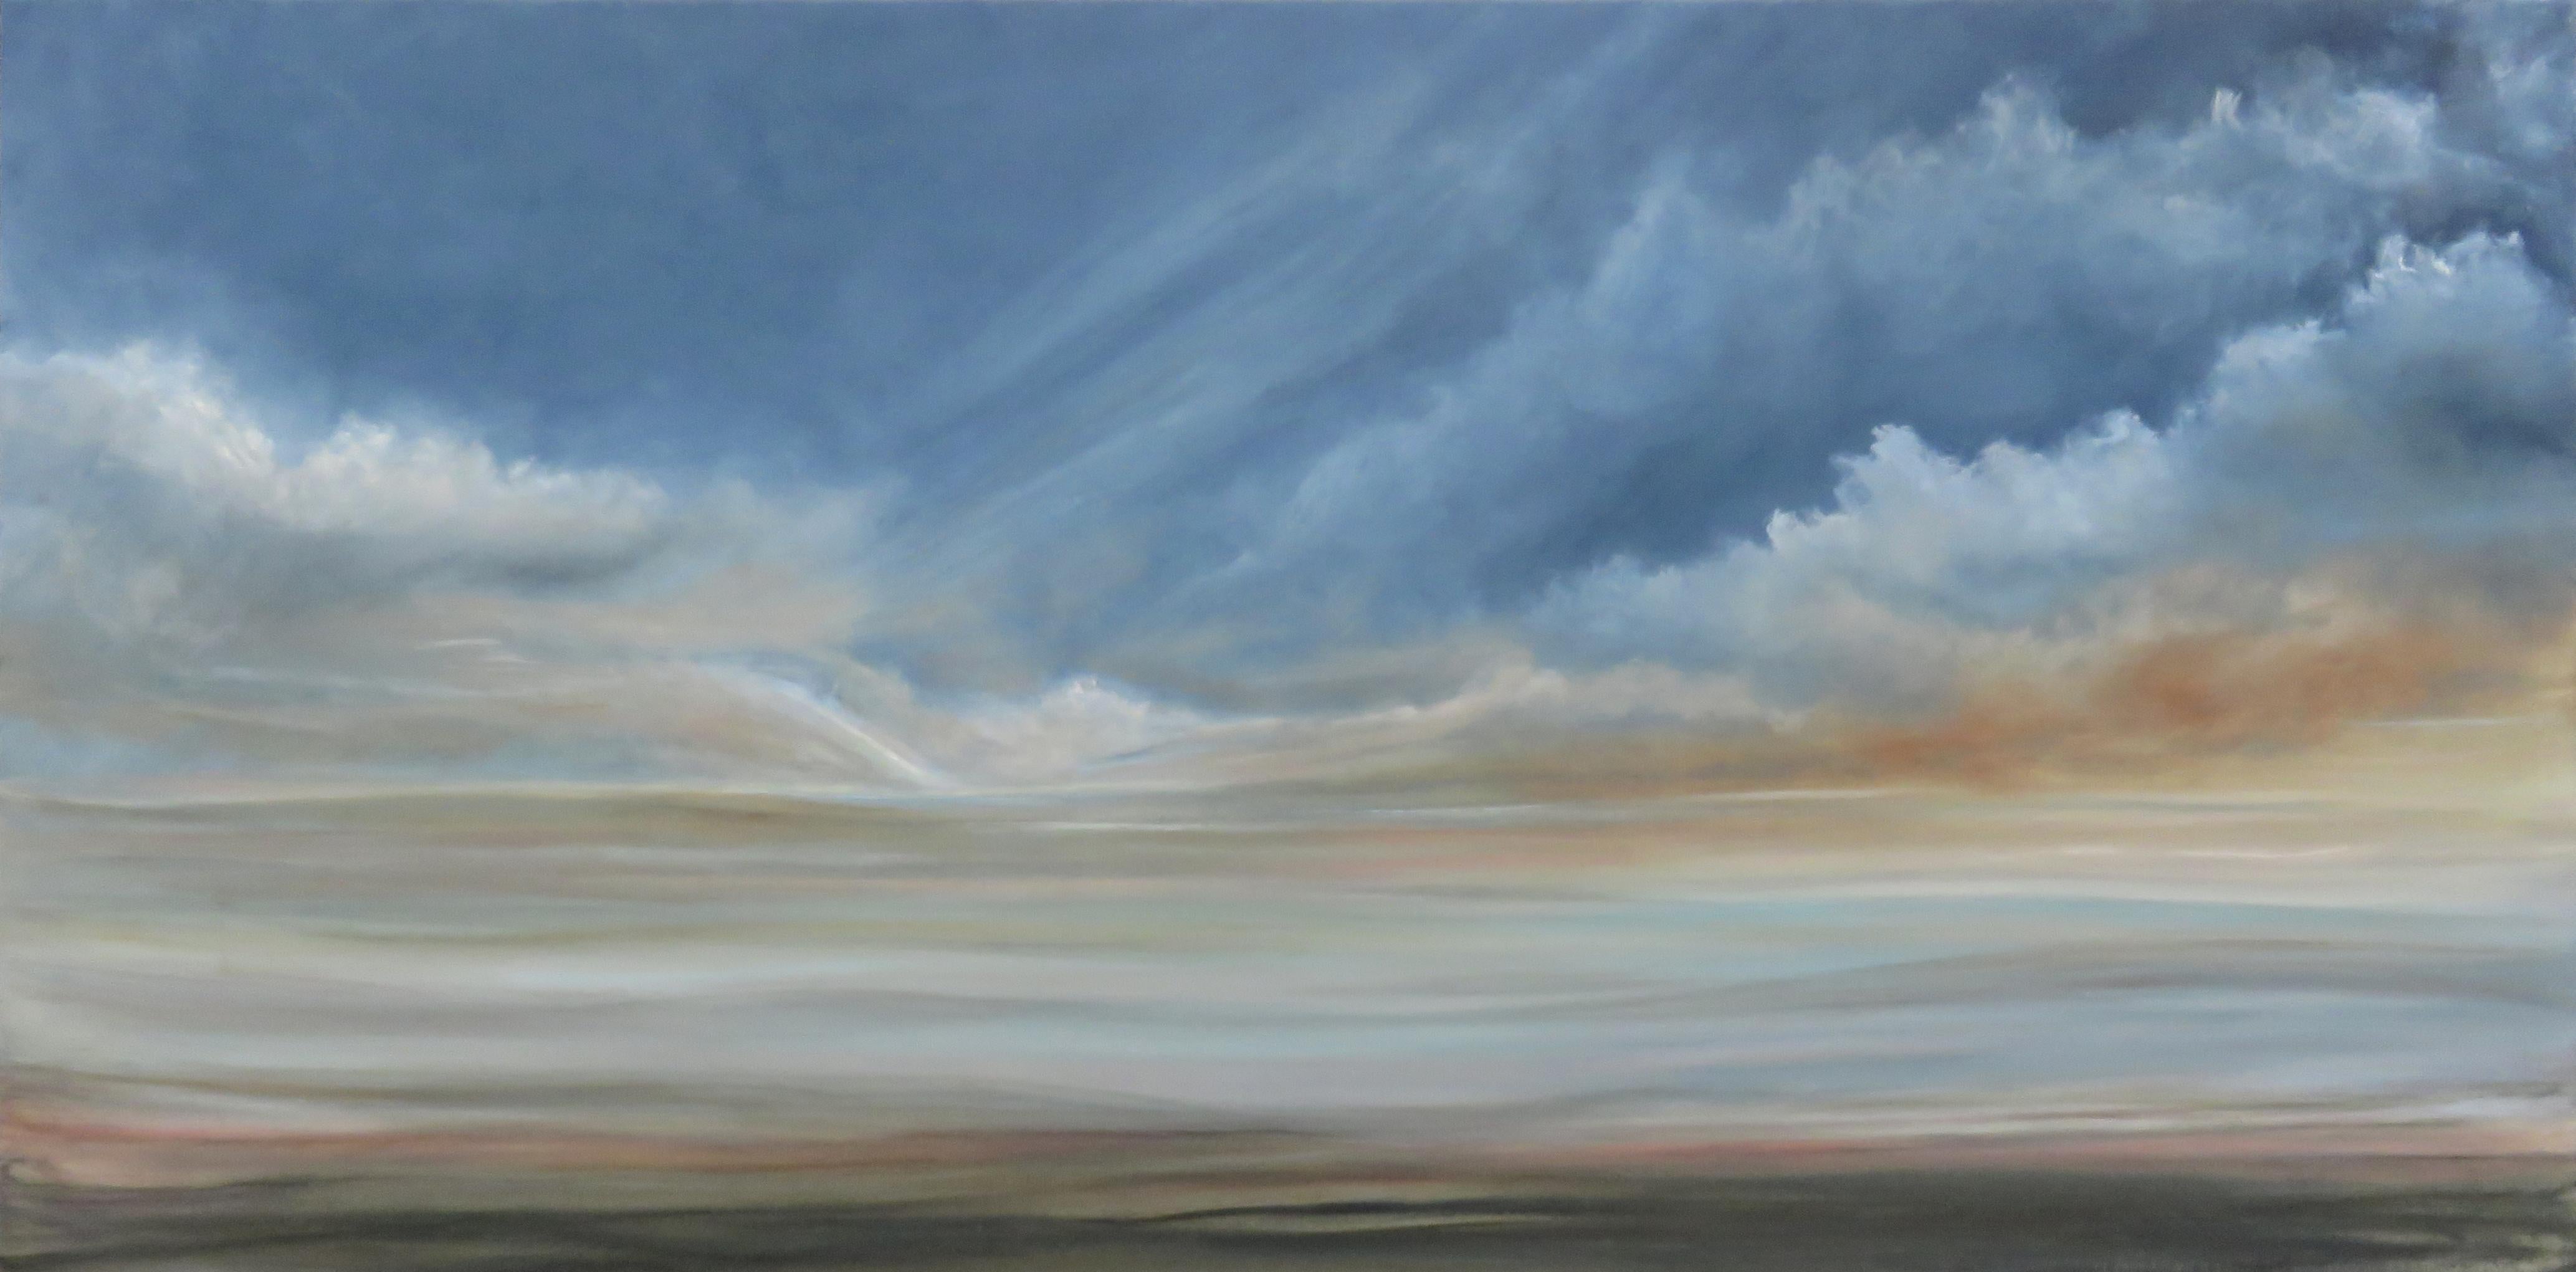 The Wind and Waves Still Know, Oil Painting - Art by Jenn Williamson